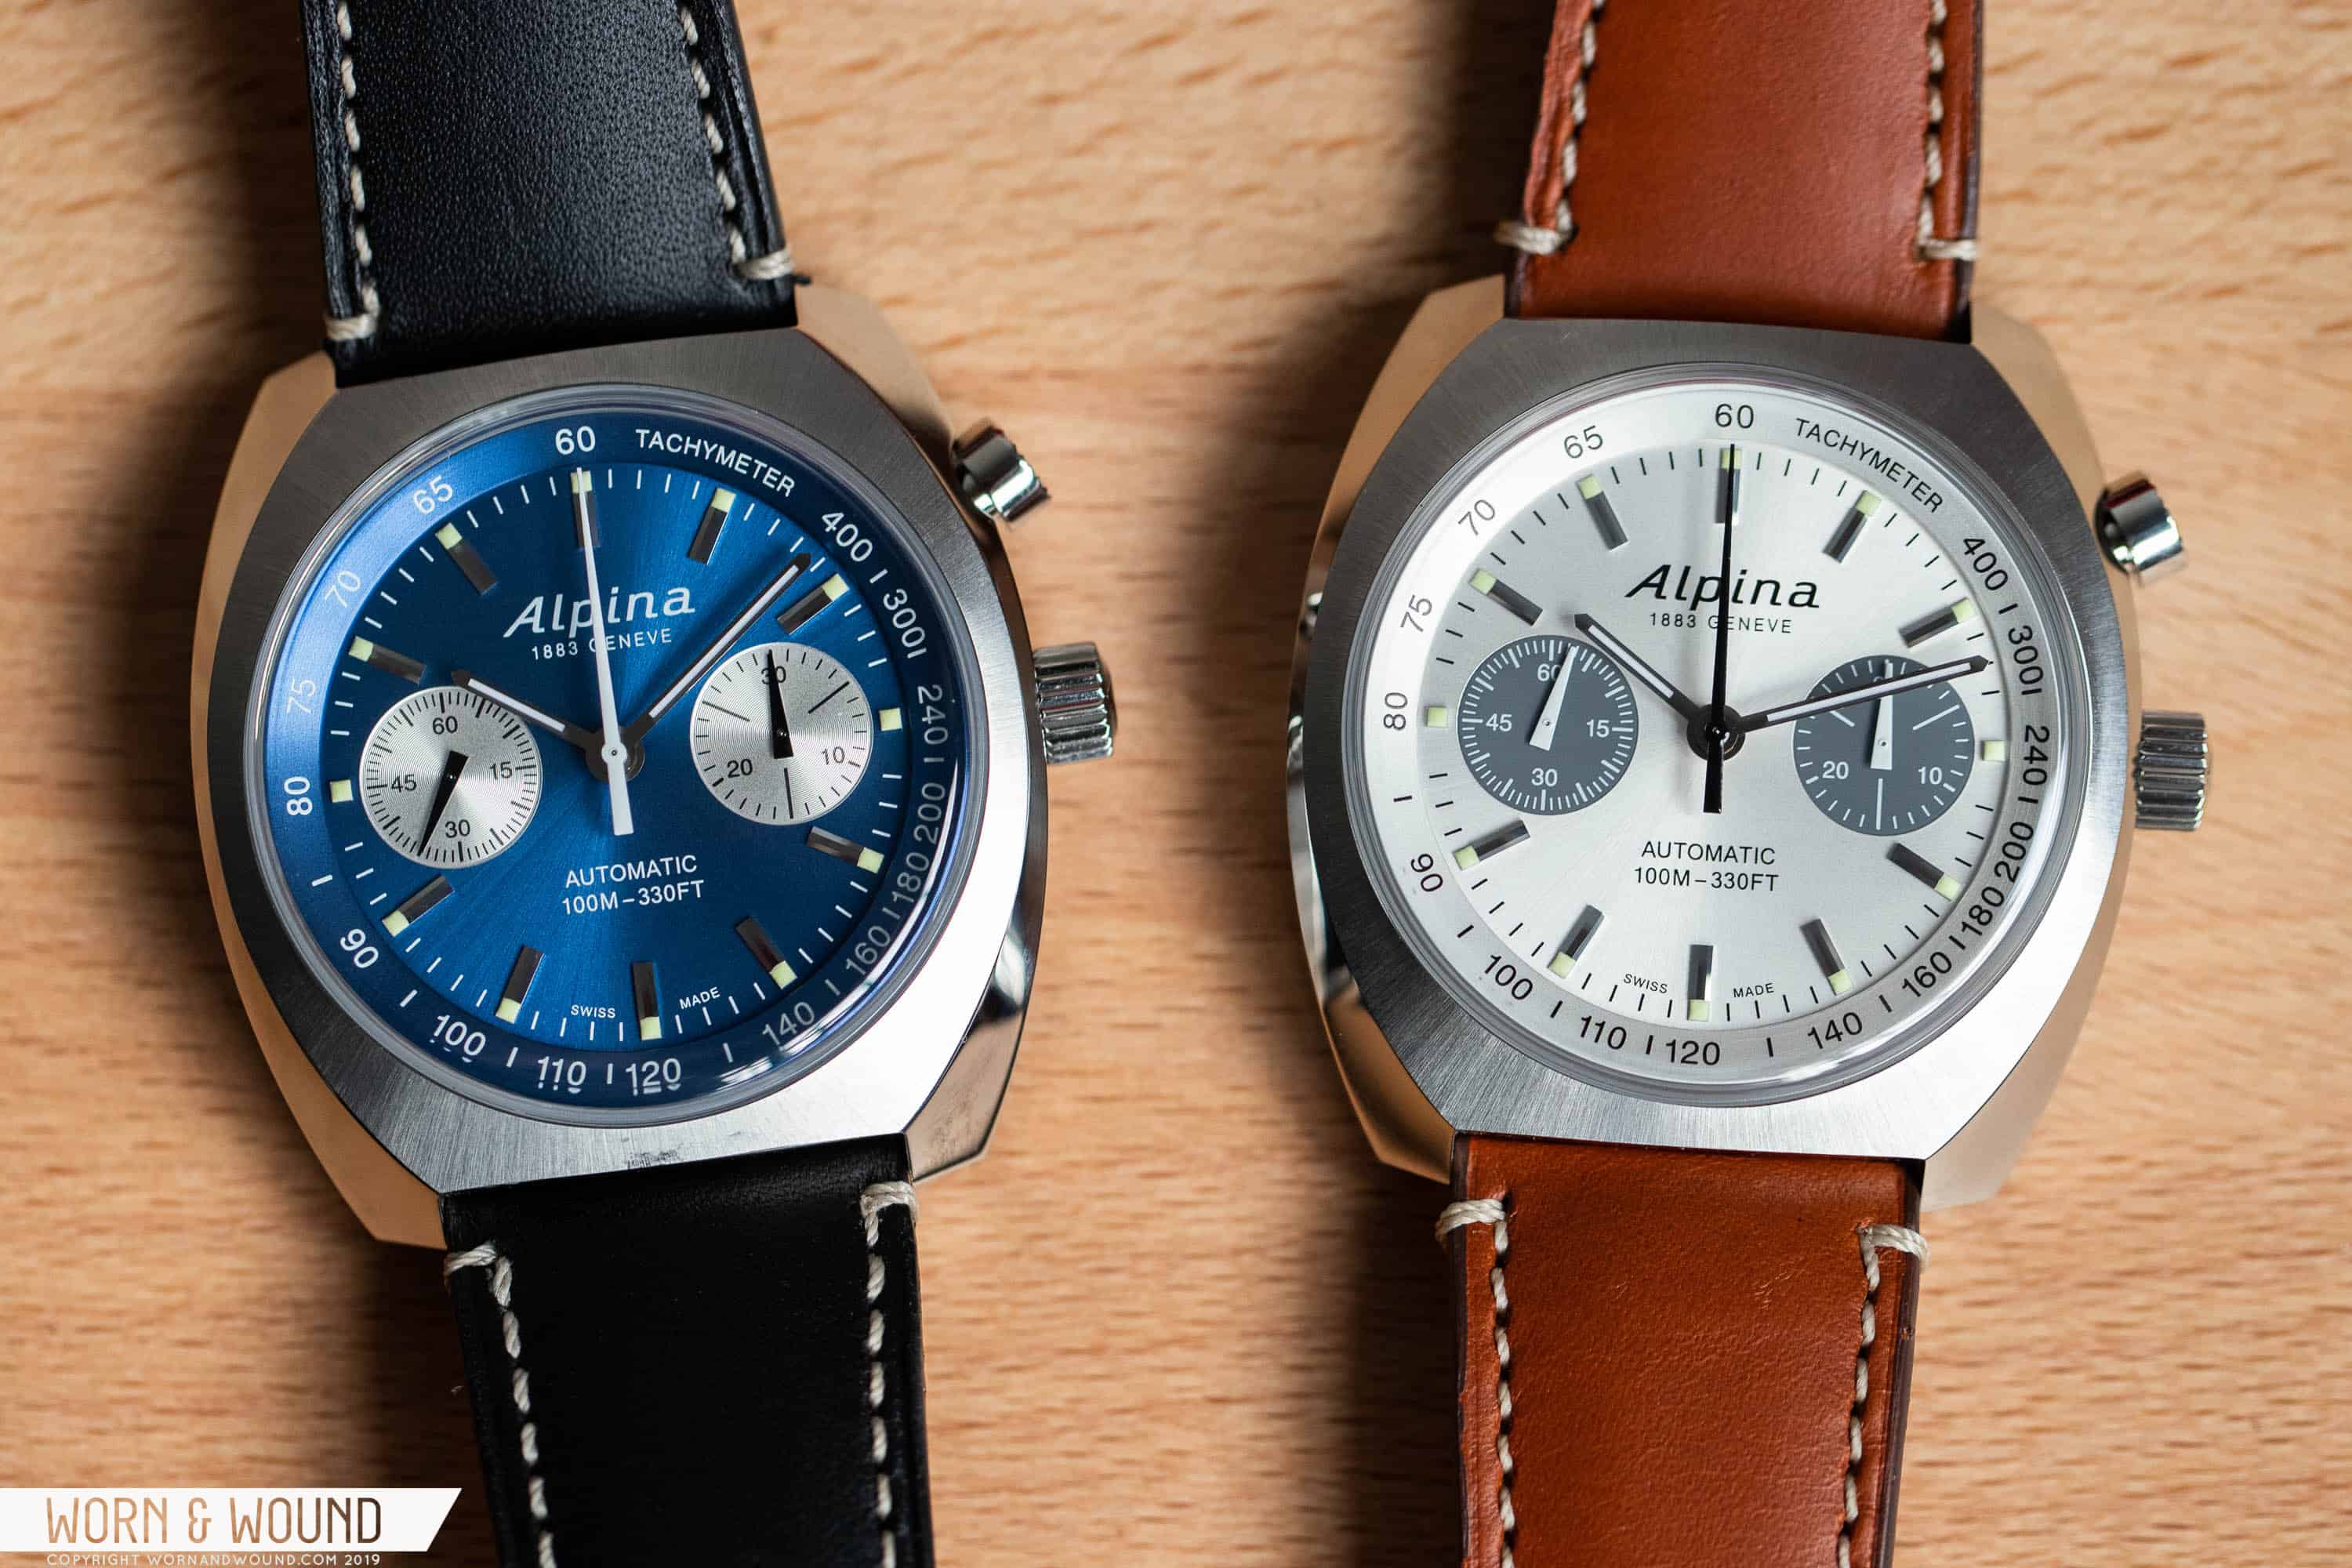 First Look at the Alpina Startimer Pilot Heritage Chronograph